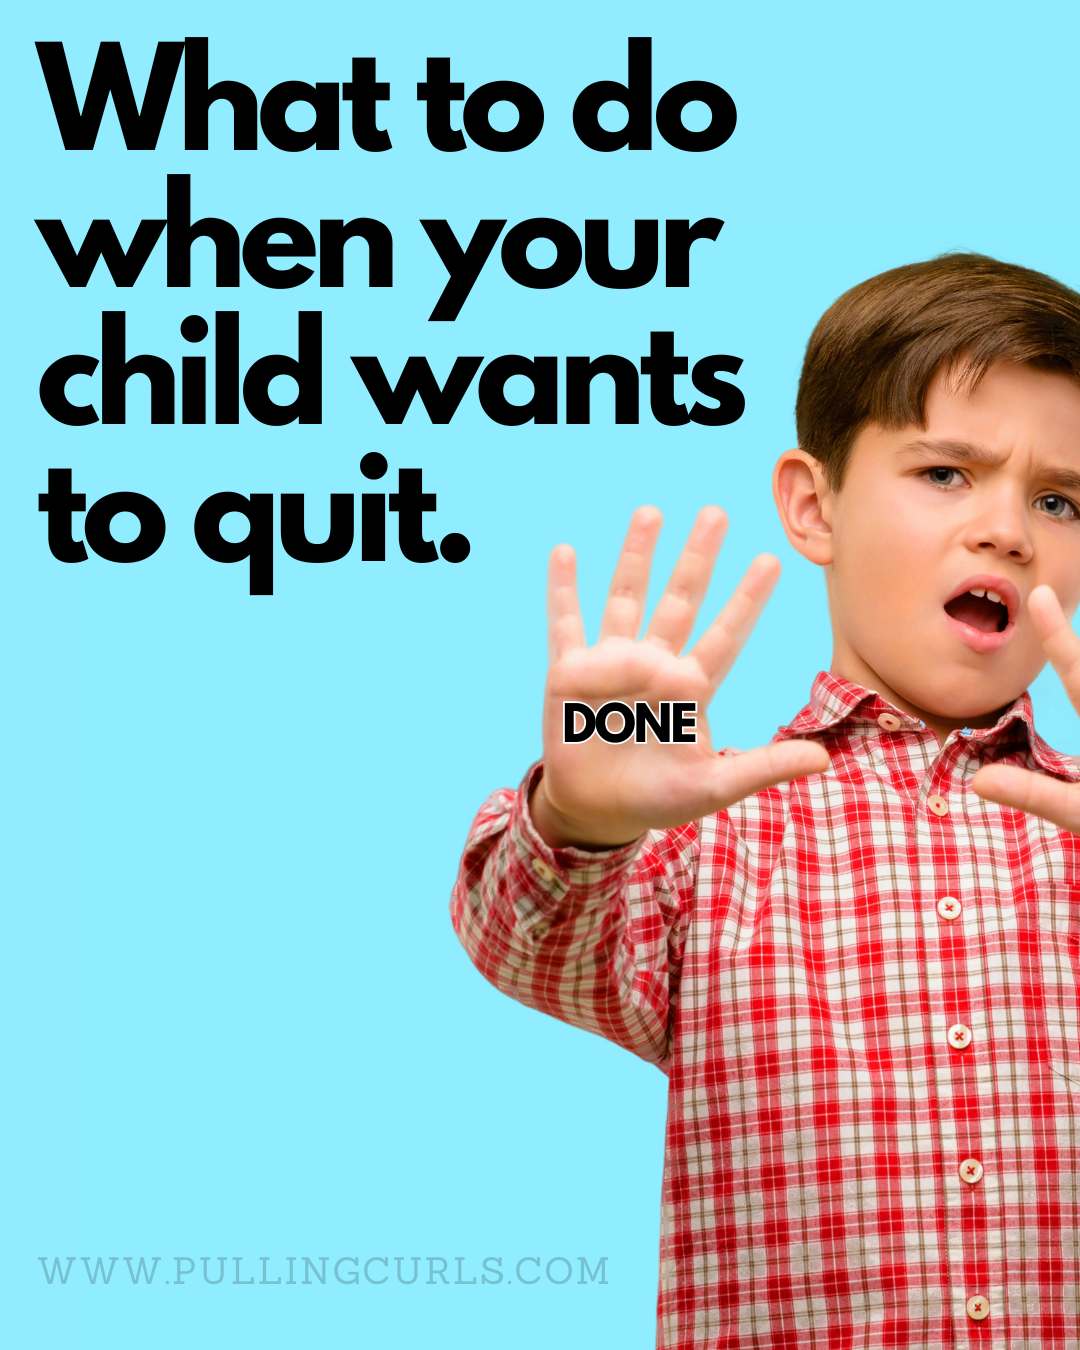 Learn how to navigate your child's desire to quit with empathy and wisdom. Gain insights on how to soften the blow, sympathize, discuss consequences, and offer alternative perspectives. An informative guide for every parent experiencing this challenging phase with their child. via @pullingcurls